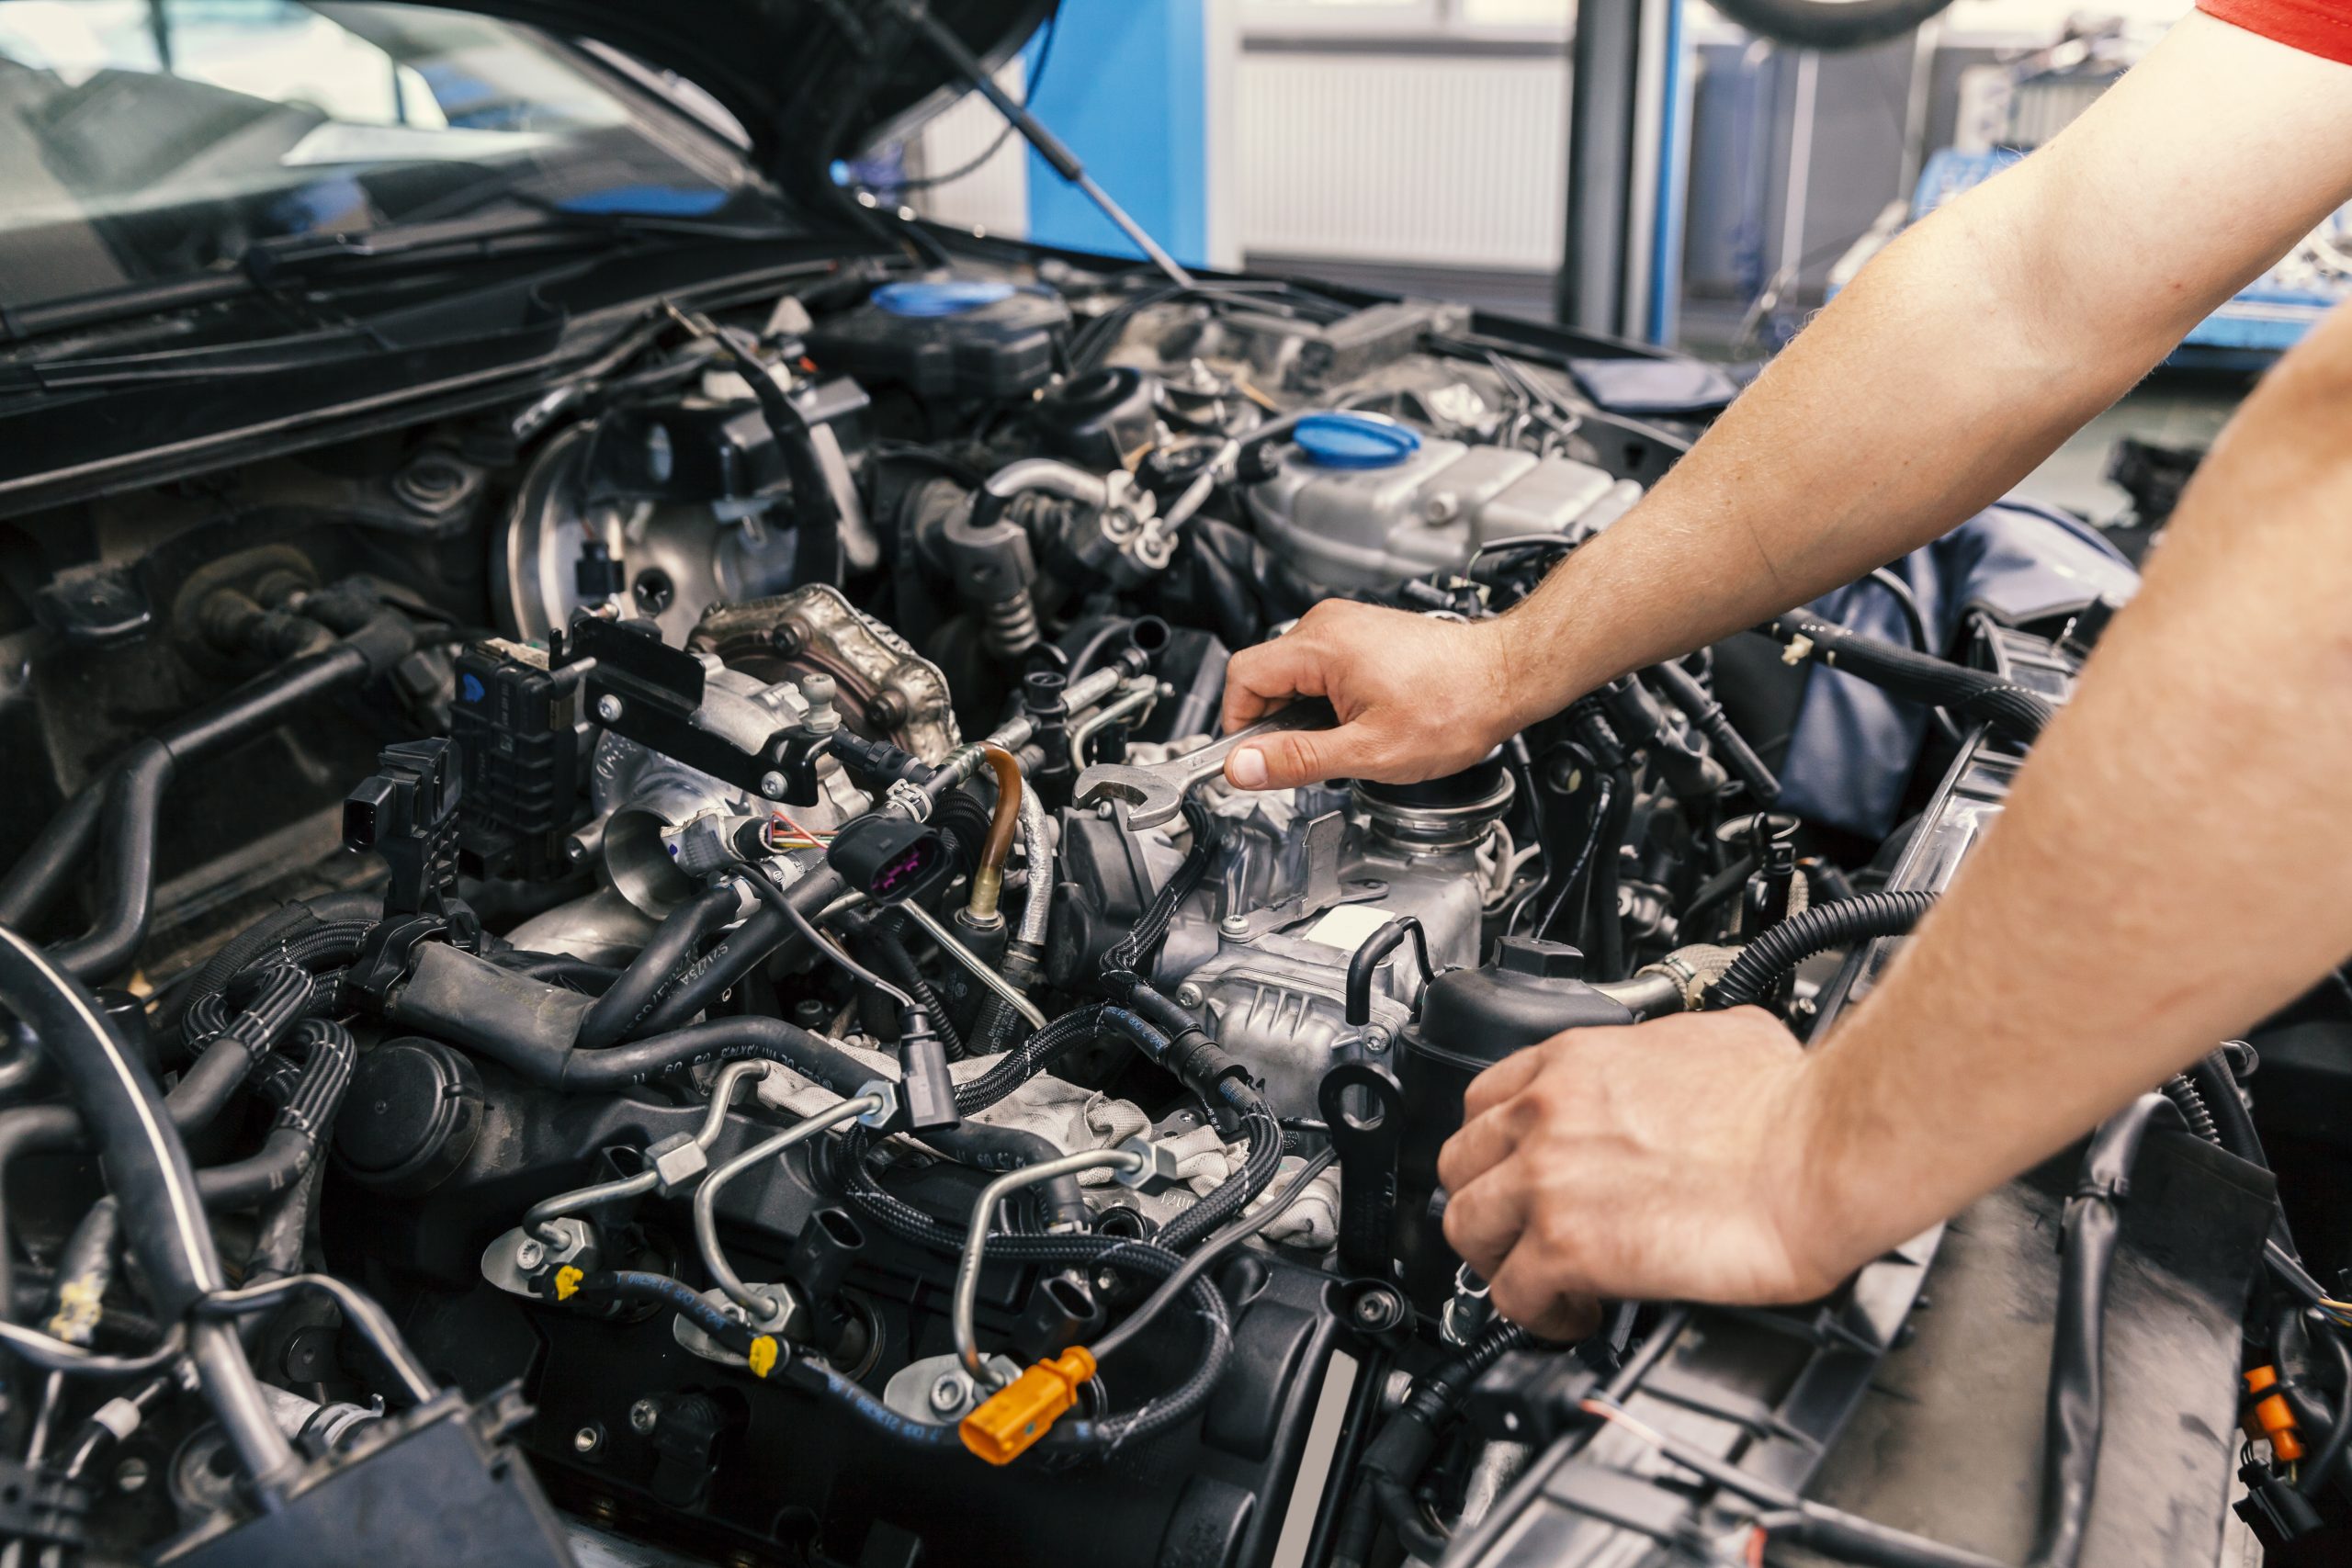 How Do I Know if My Car Engine is Healthy?